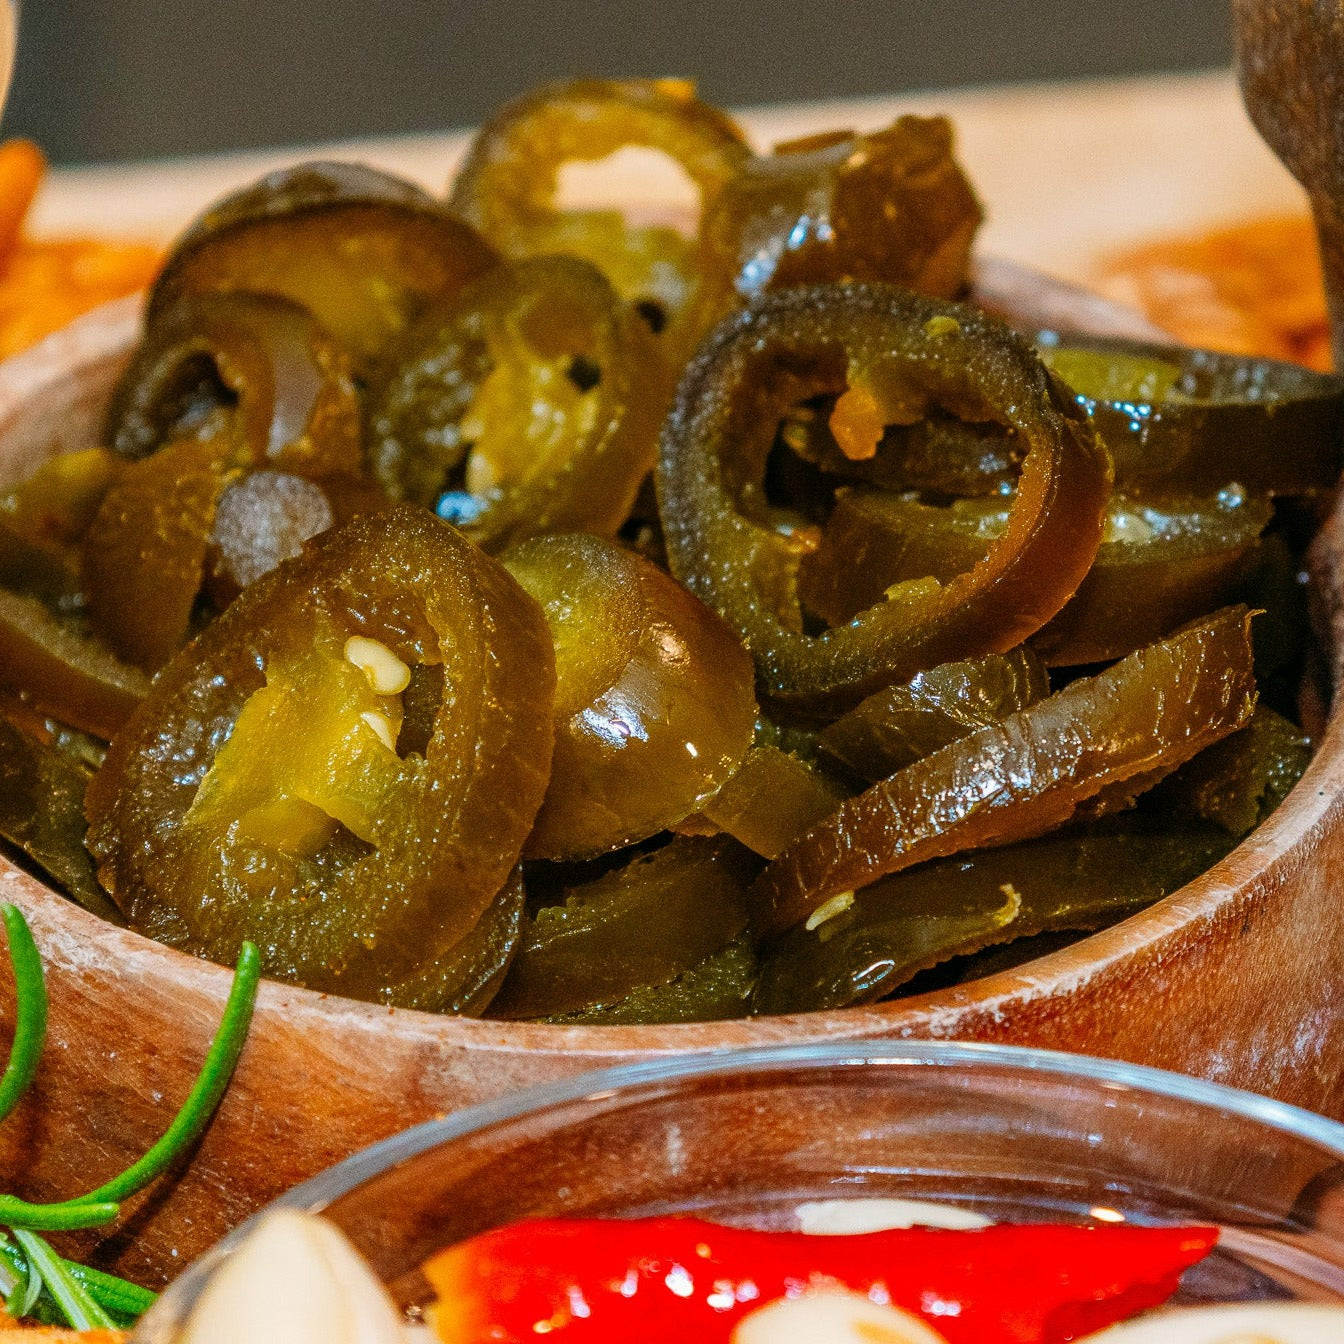 Candied Jalapenos in wooden bowl on graze or charcuterie board